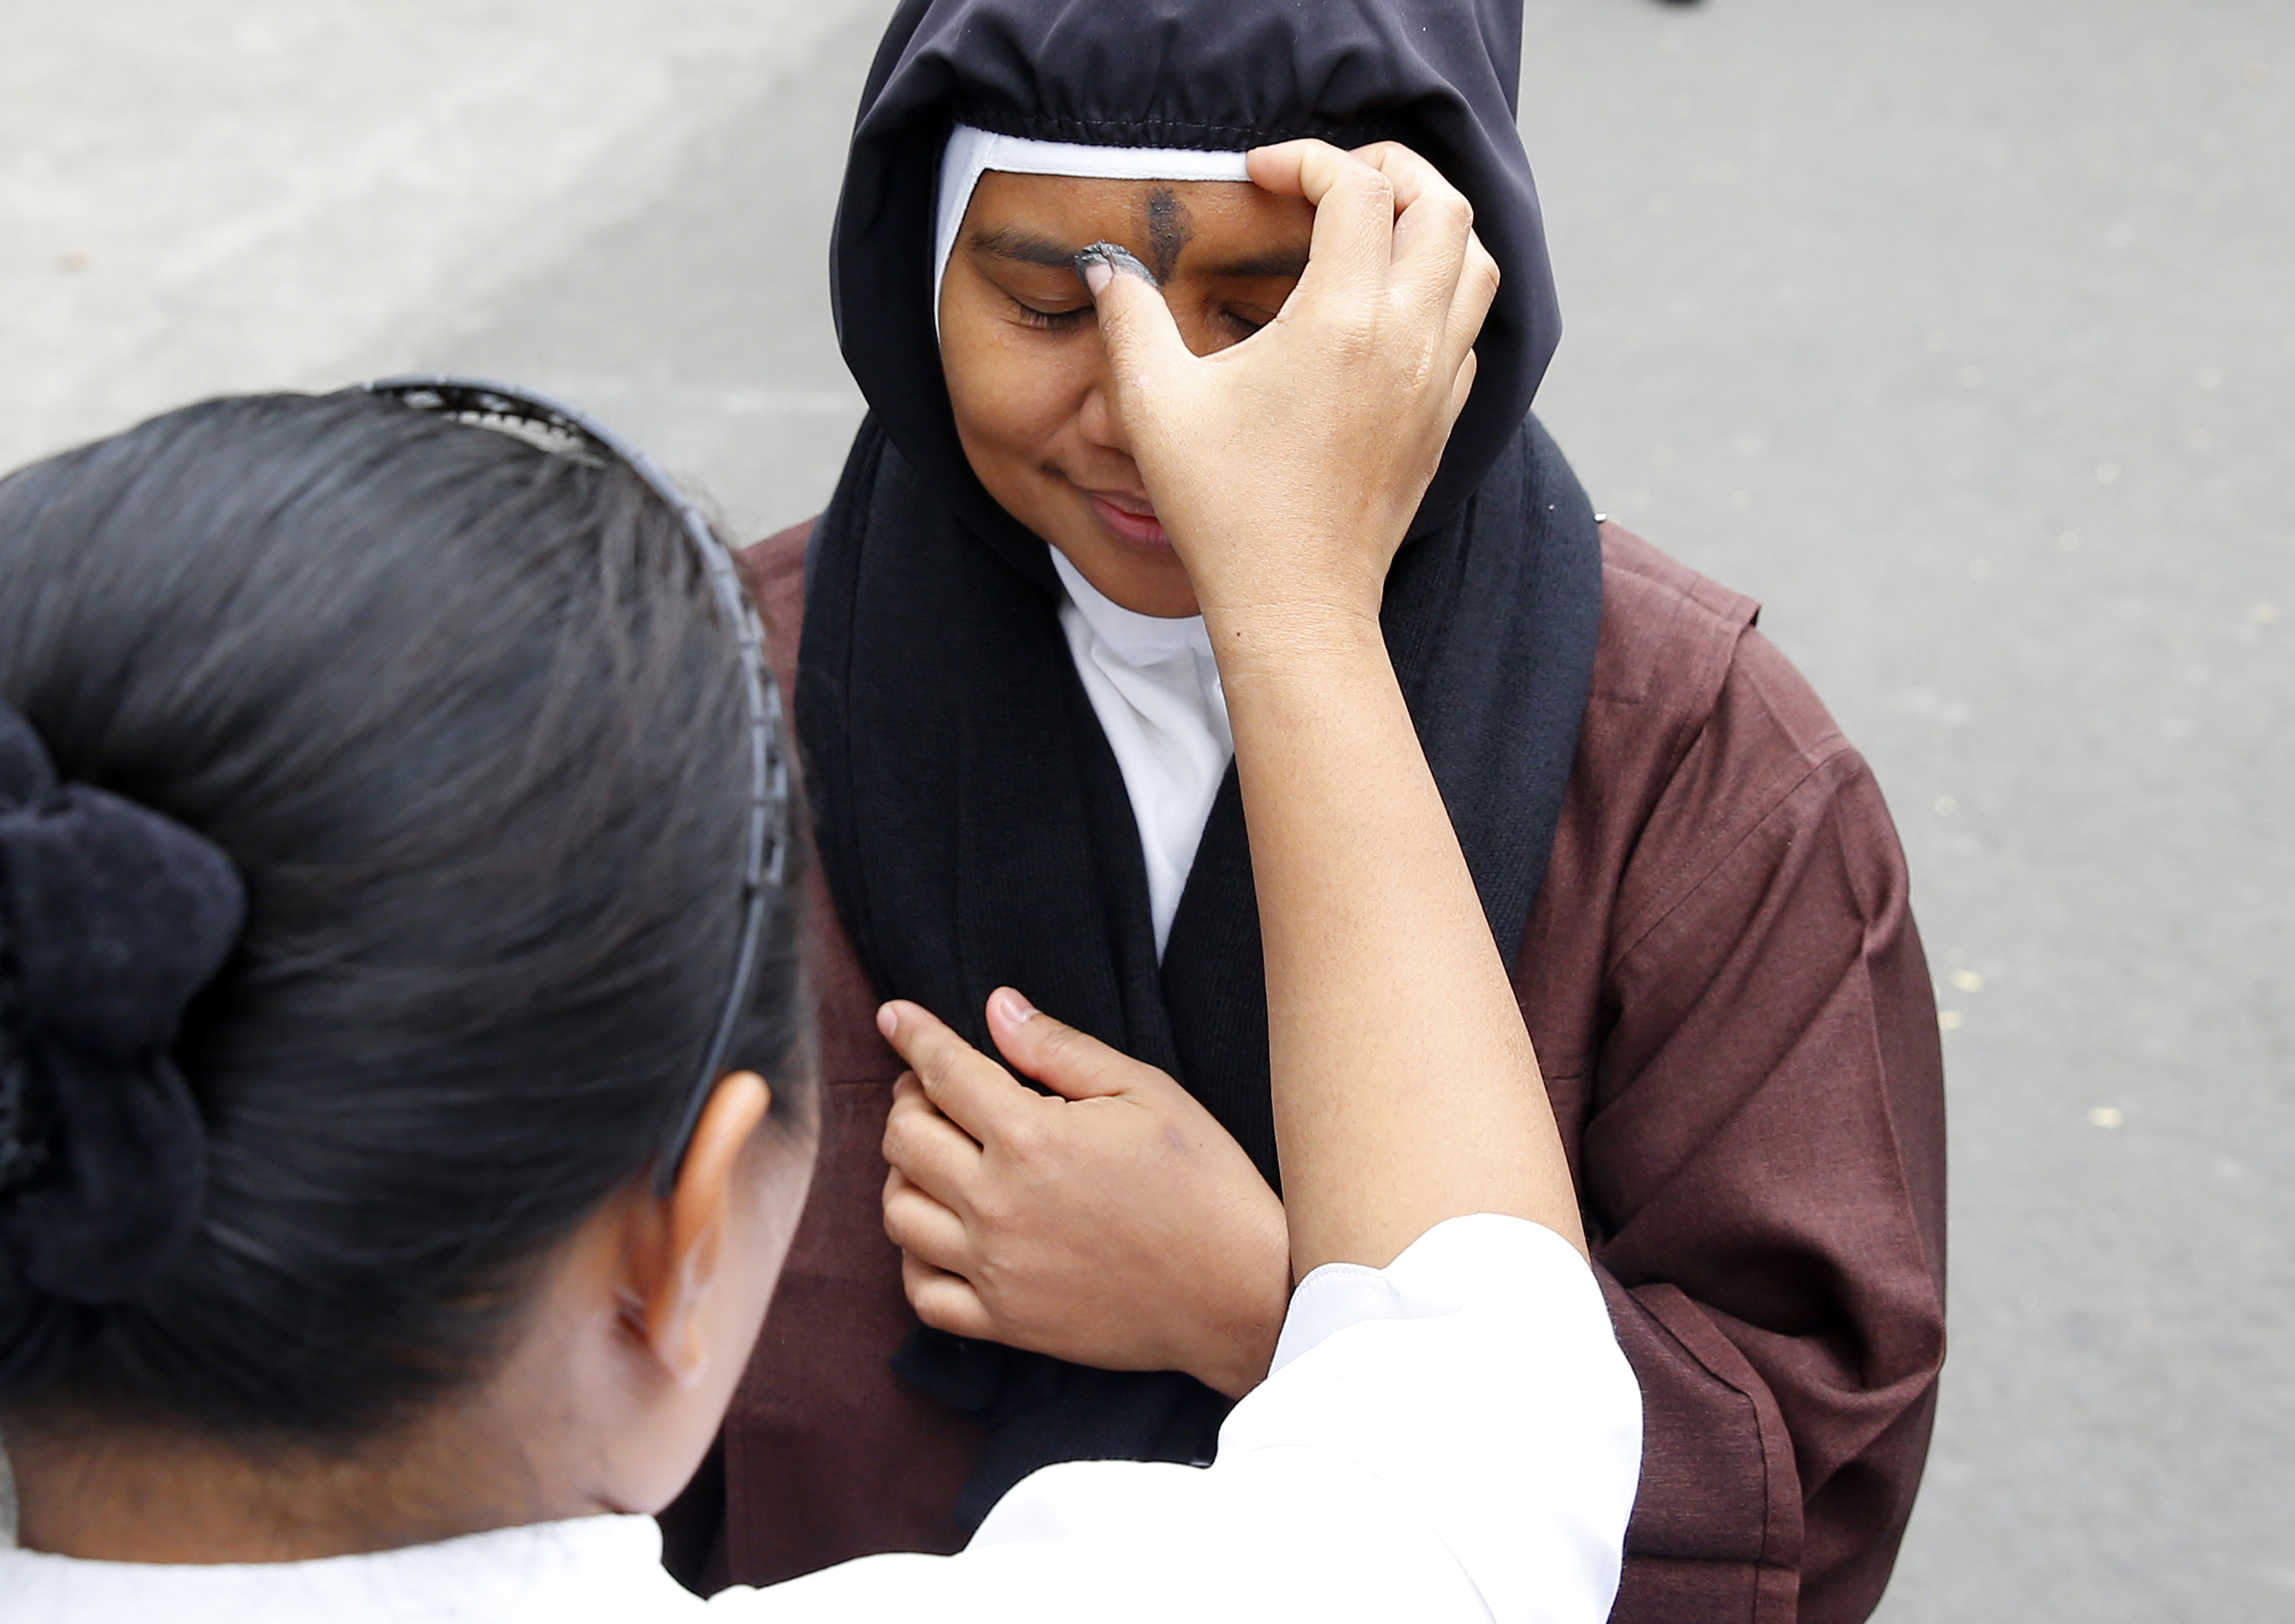 A Roman Catholic nun has her forehead rubbed with ash to usher the season of Lent known as Ash Wednesday and which also coincides with Valentine's Day celebration Wednesday, Feb. 14, 2018, in Paranaque southeast of Manila, Philippines. Ash Wednesday is observed all over the world by Roman Catholics to remind mankind that God created humans from dust. (AP Photo/Bullit Marquez)